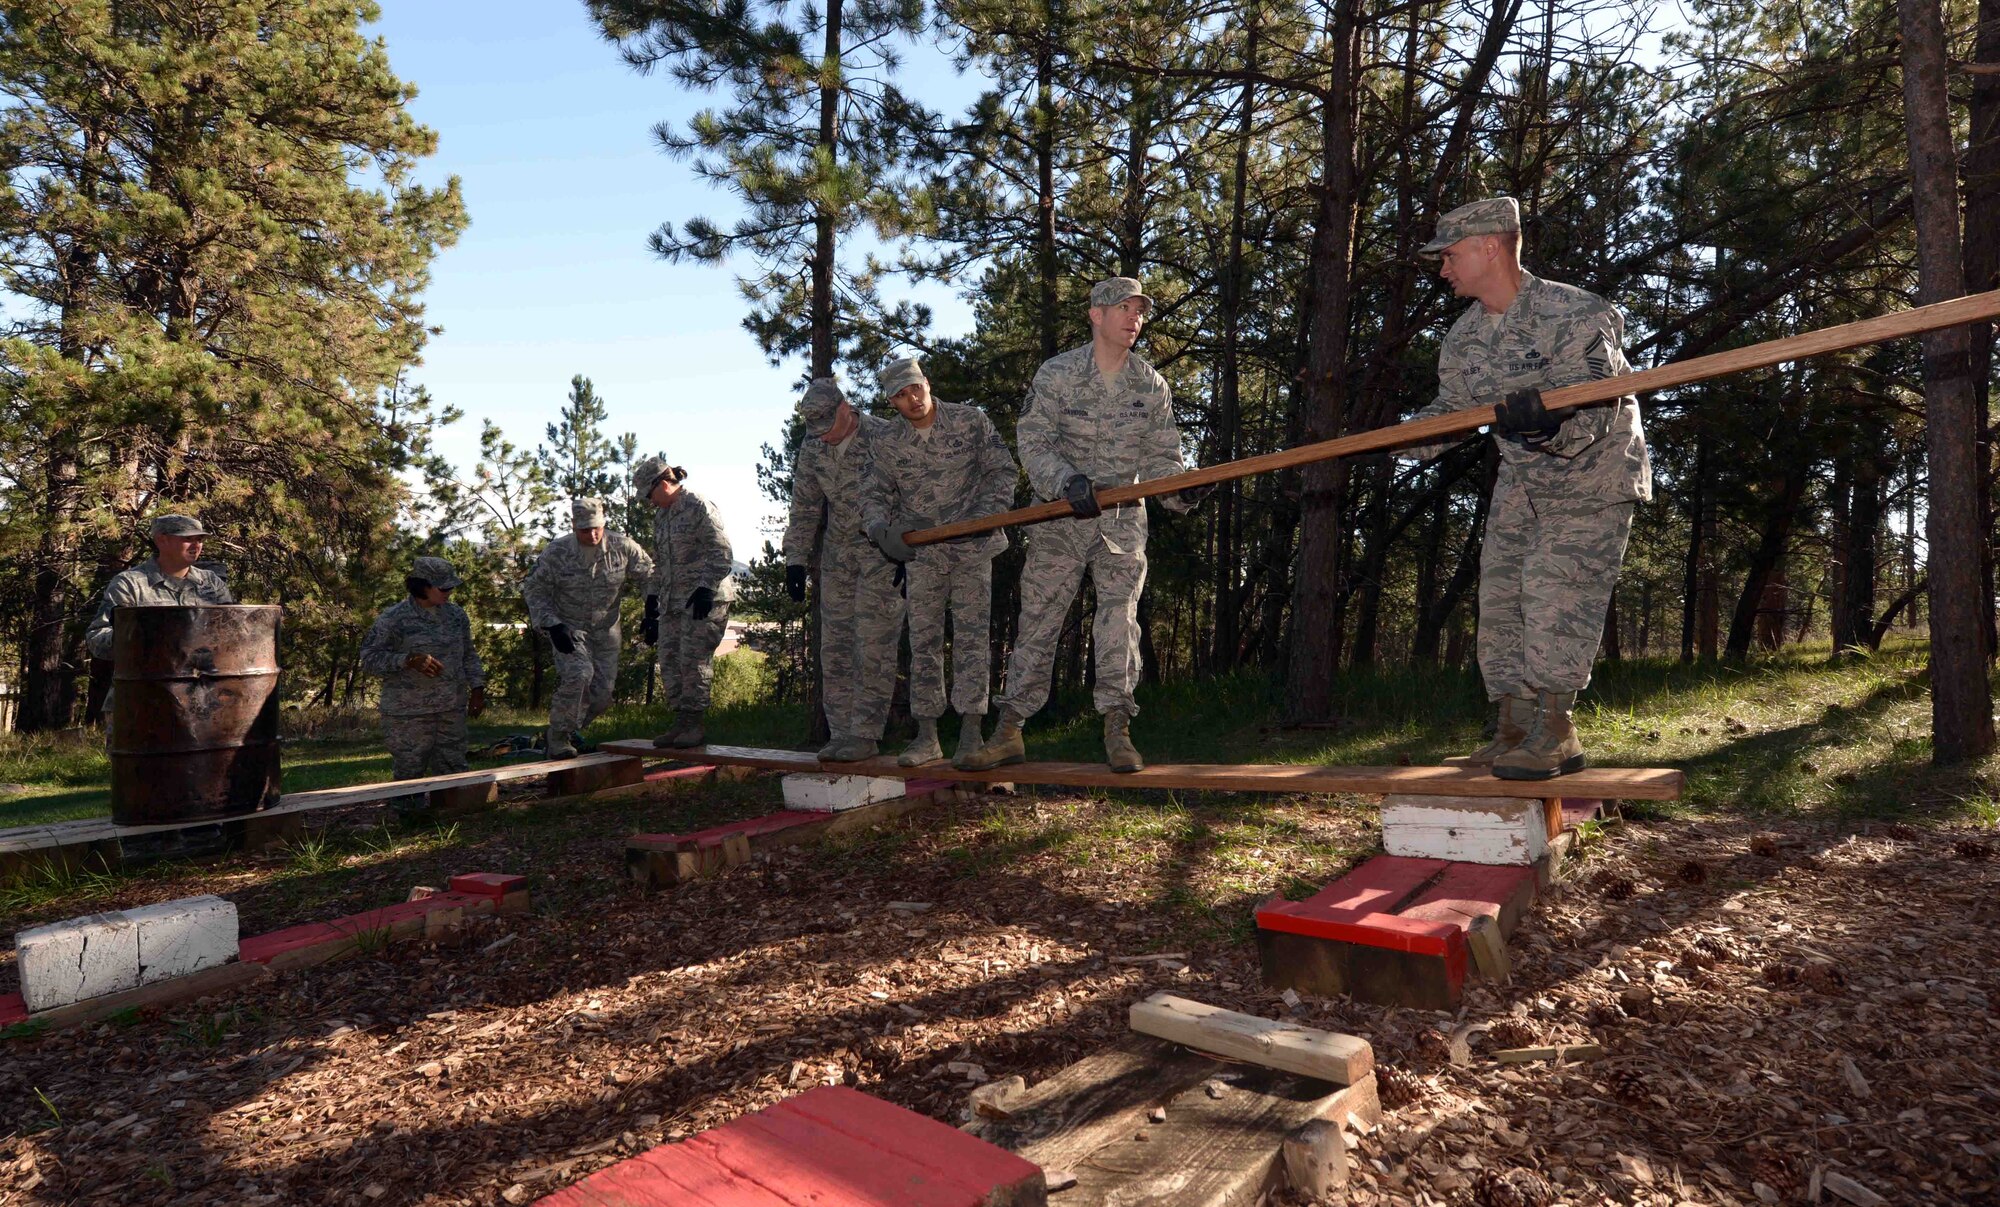 First sergeants from Ellsworth Air Force Base, S.D., attempt to cross an obstacle during a Leadership Reaction Course at the South Dakota National Guard West Camp Rapid training facility, Rapid City, Sept. 15, 2016. This challenge, along with a few others, demanded a great deal of trust among the participants in order to achieve the given task. (U.S. Air Force photo by Airman 1st Class Donald C. Knechtel)